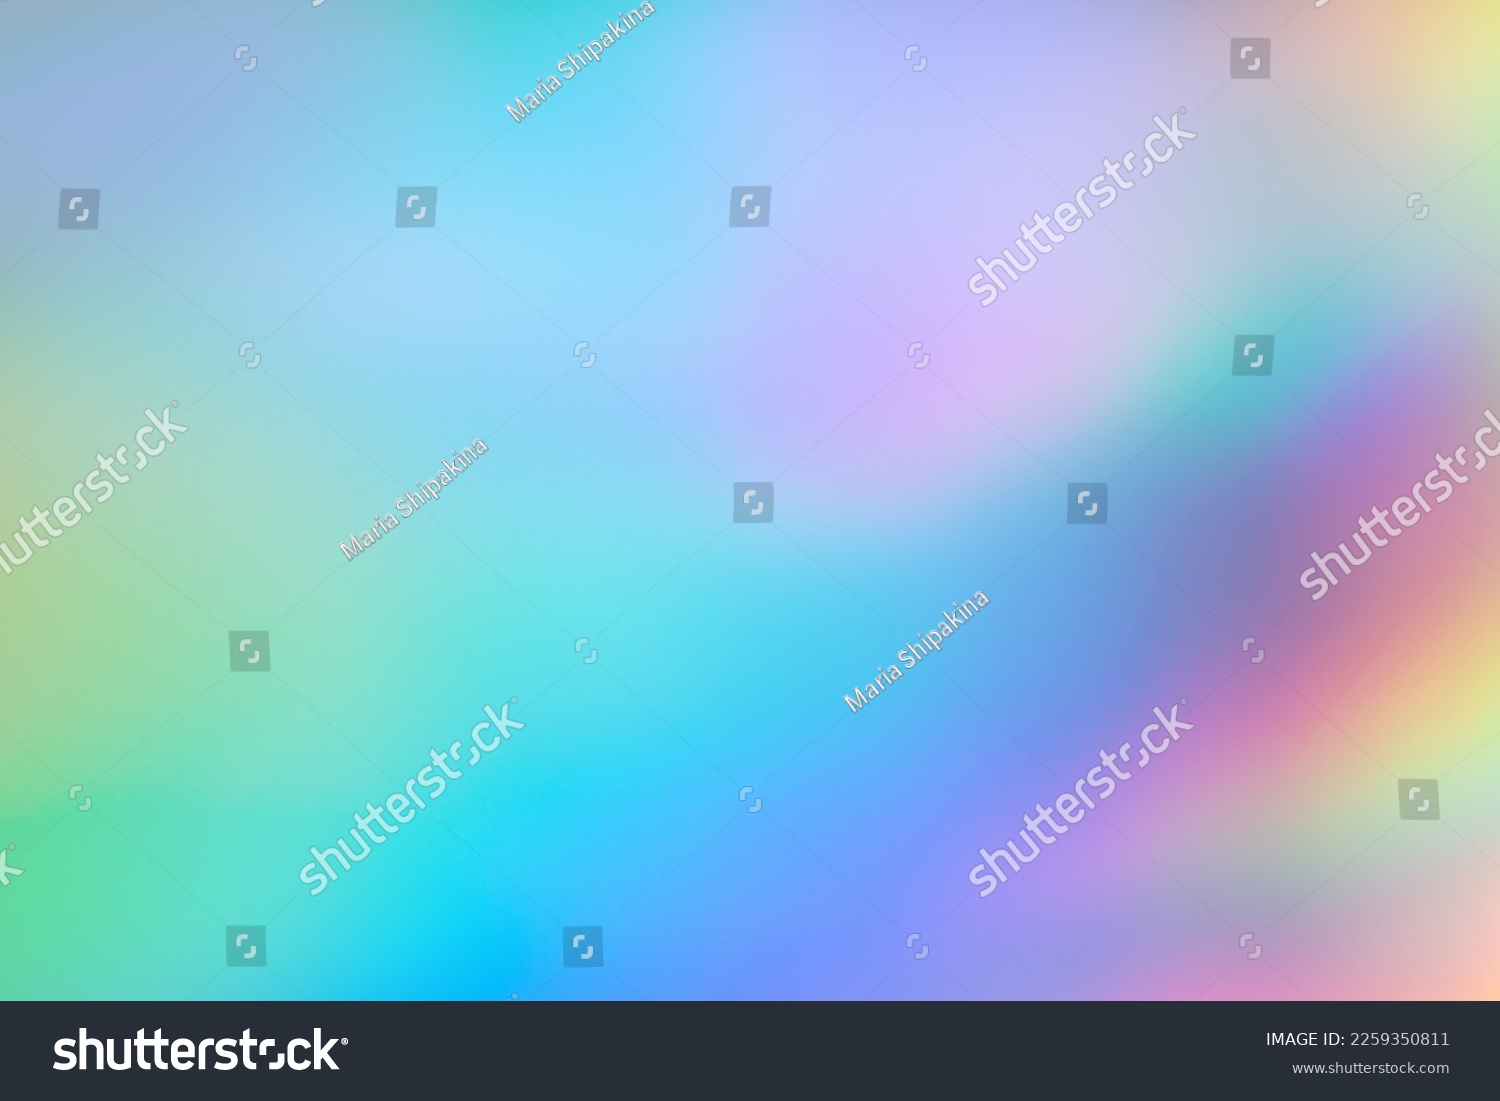 Abstract holographic neon foil background, holographic paper blurred background, iridescent colors, copy space #2259350811